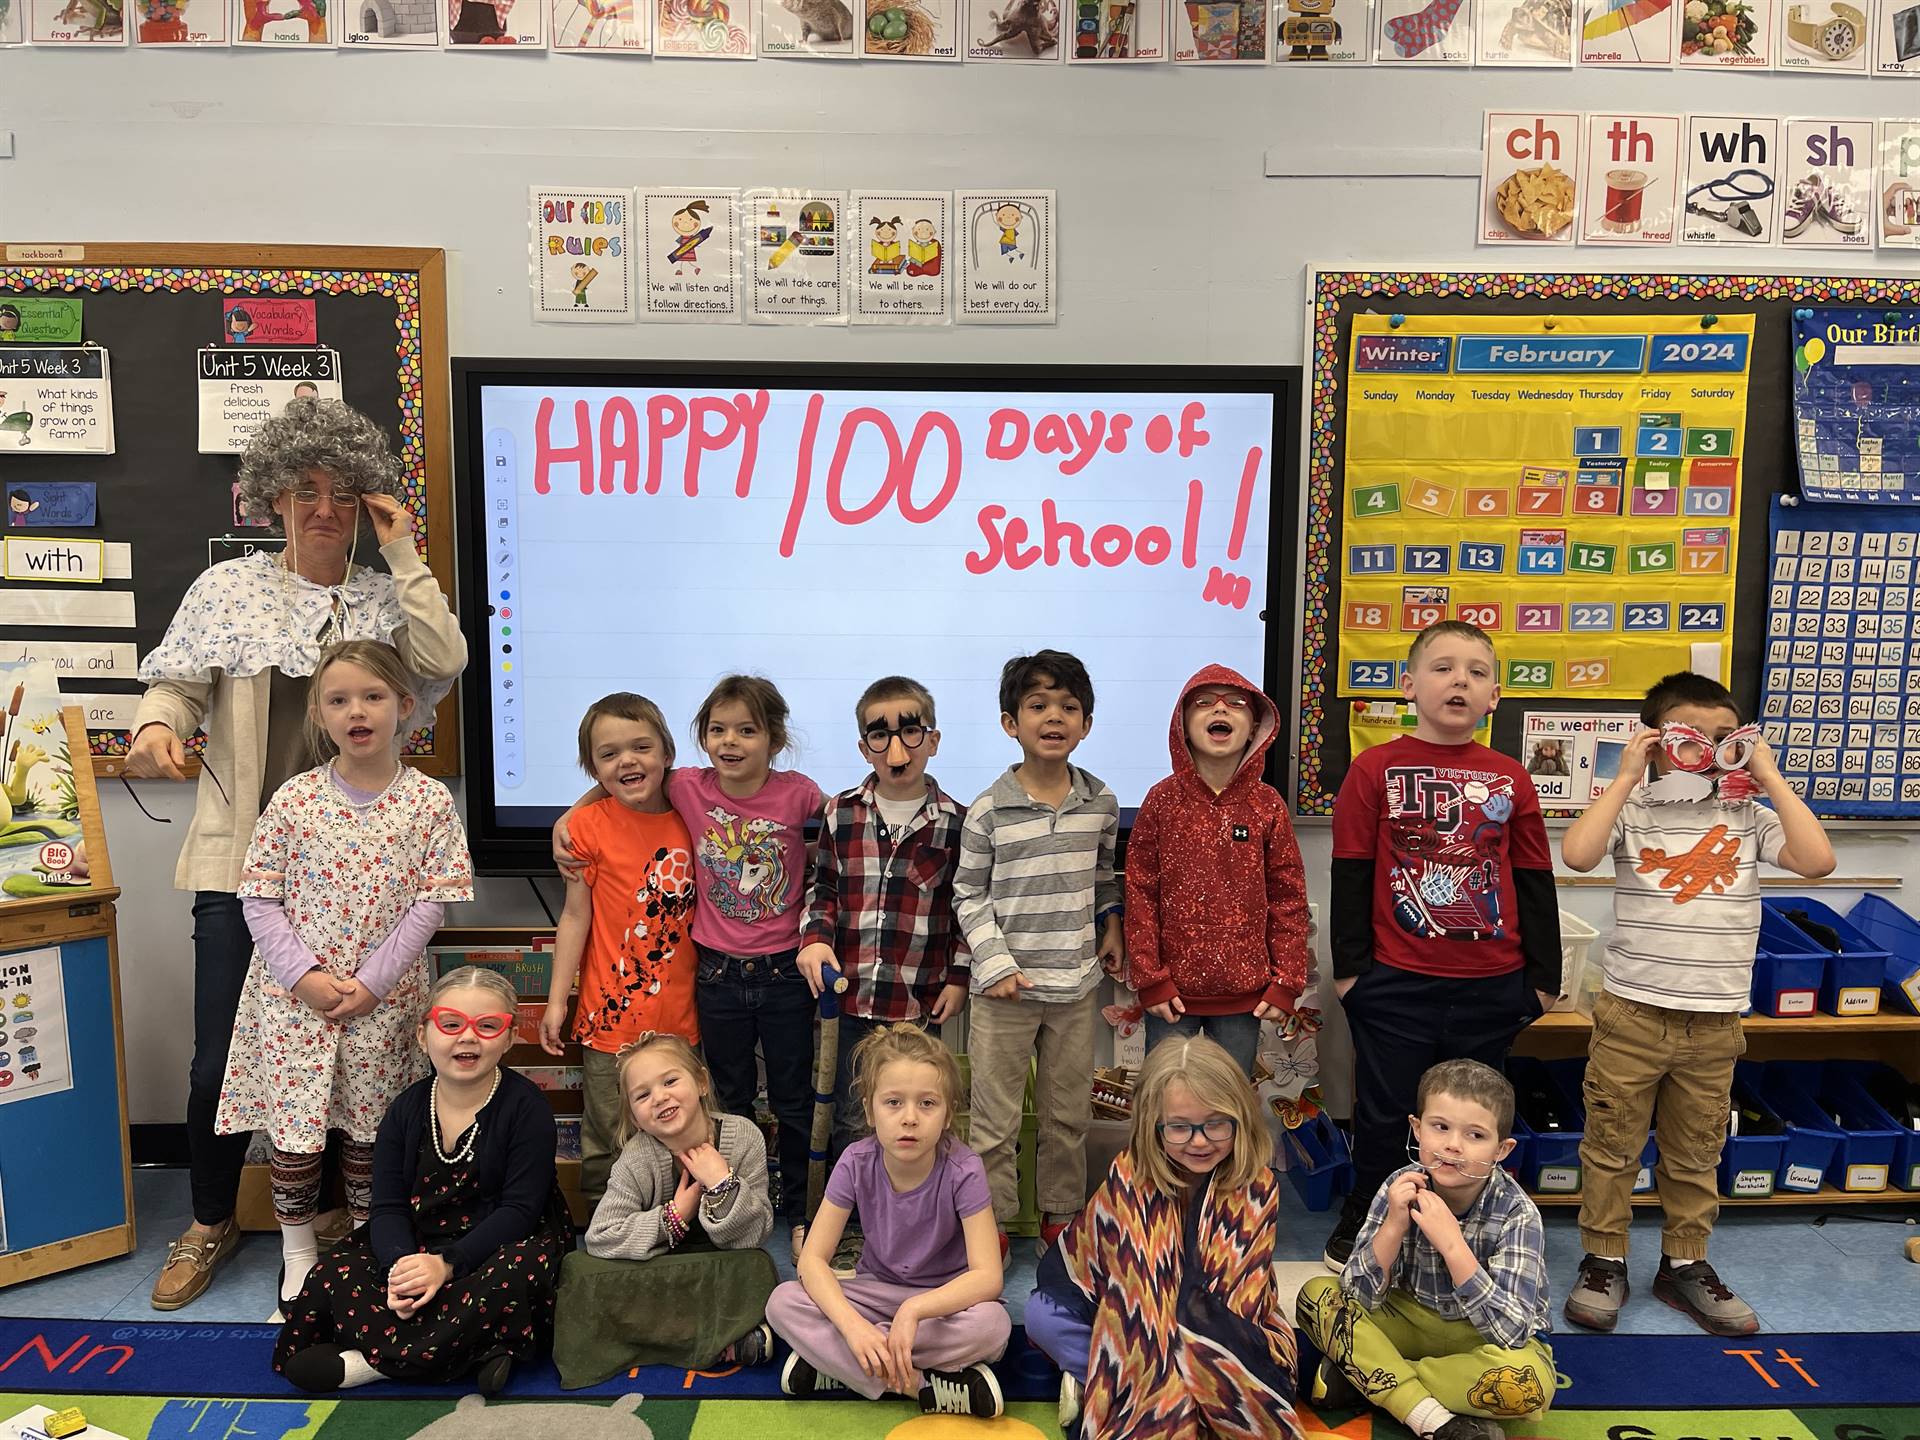 students dressed up as 100 yrs. old.